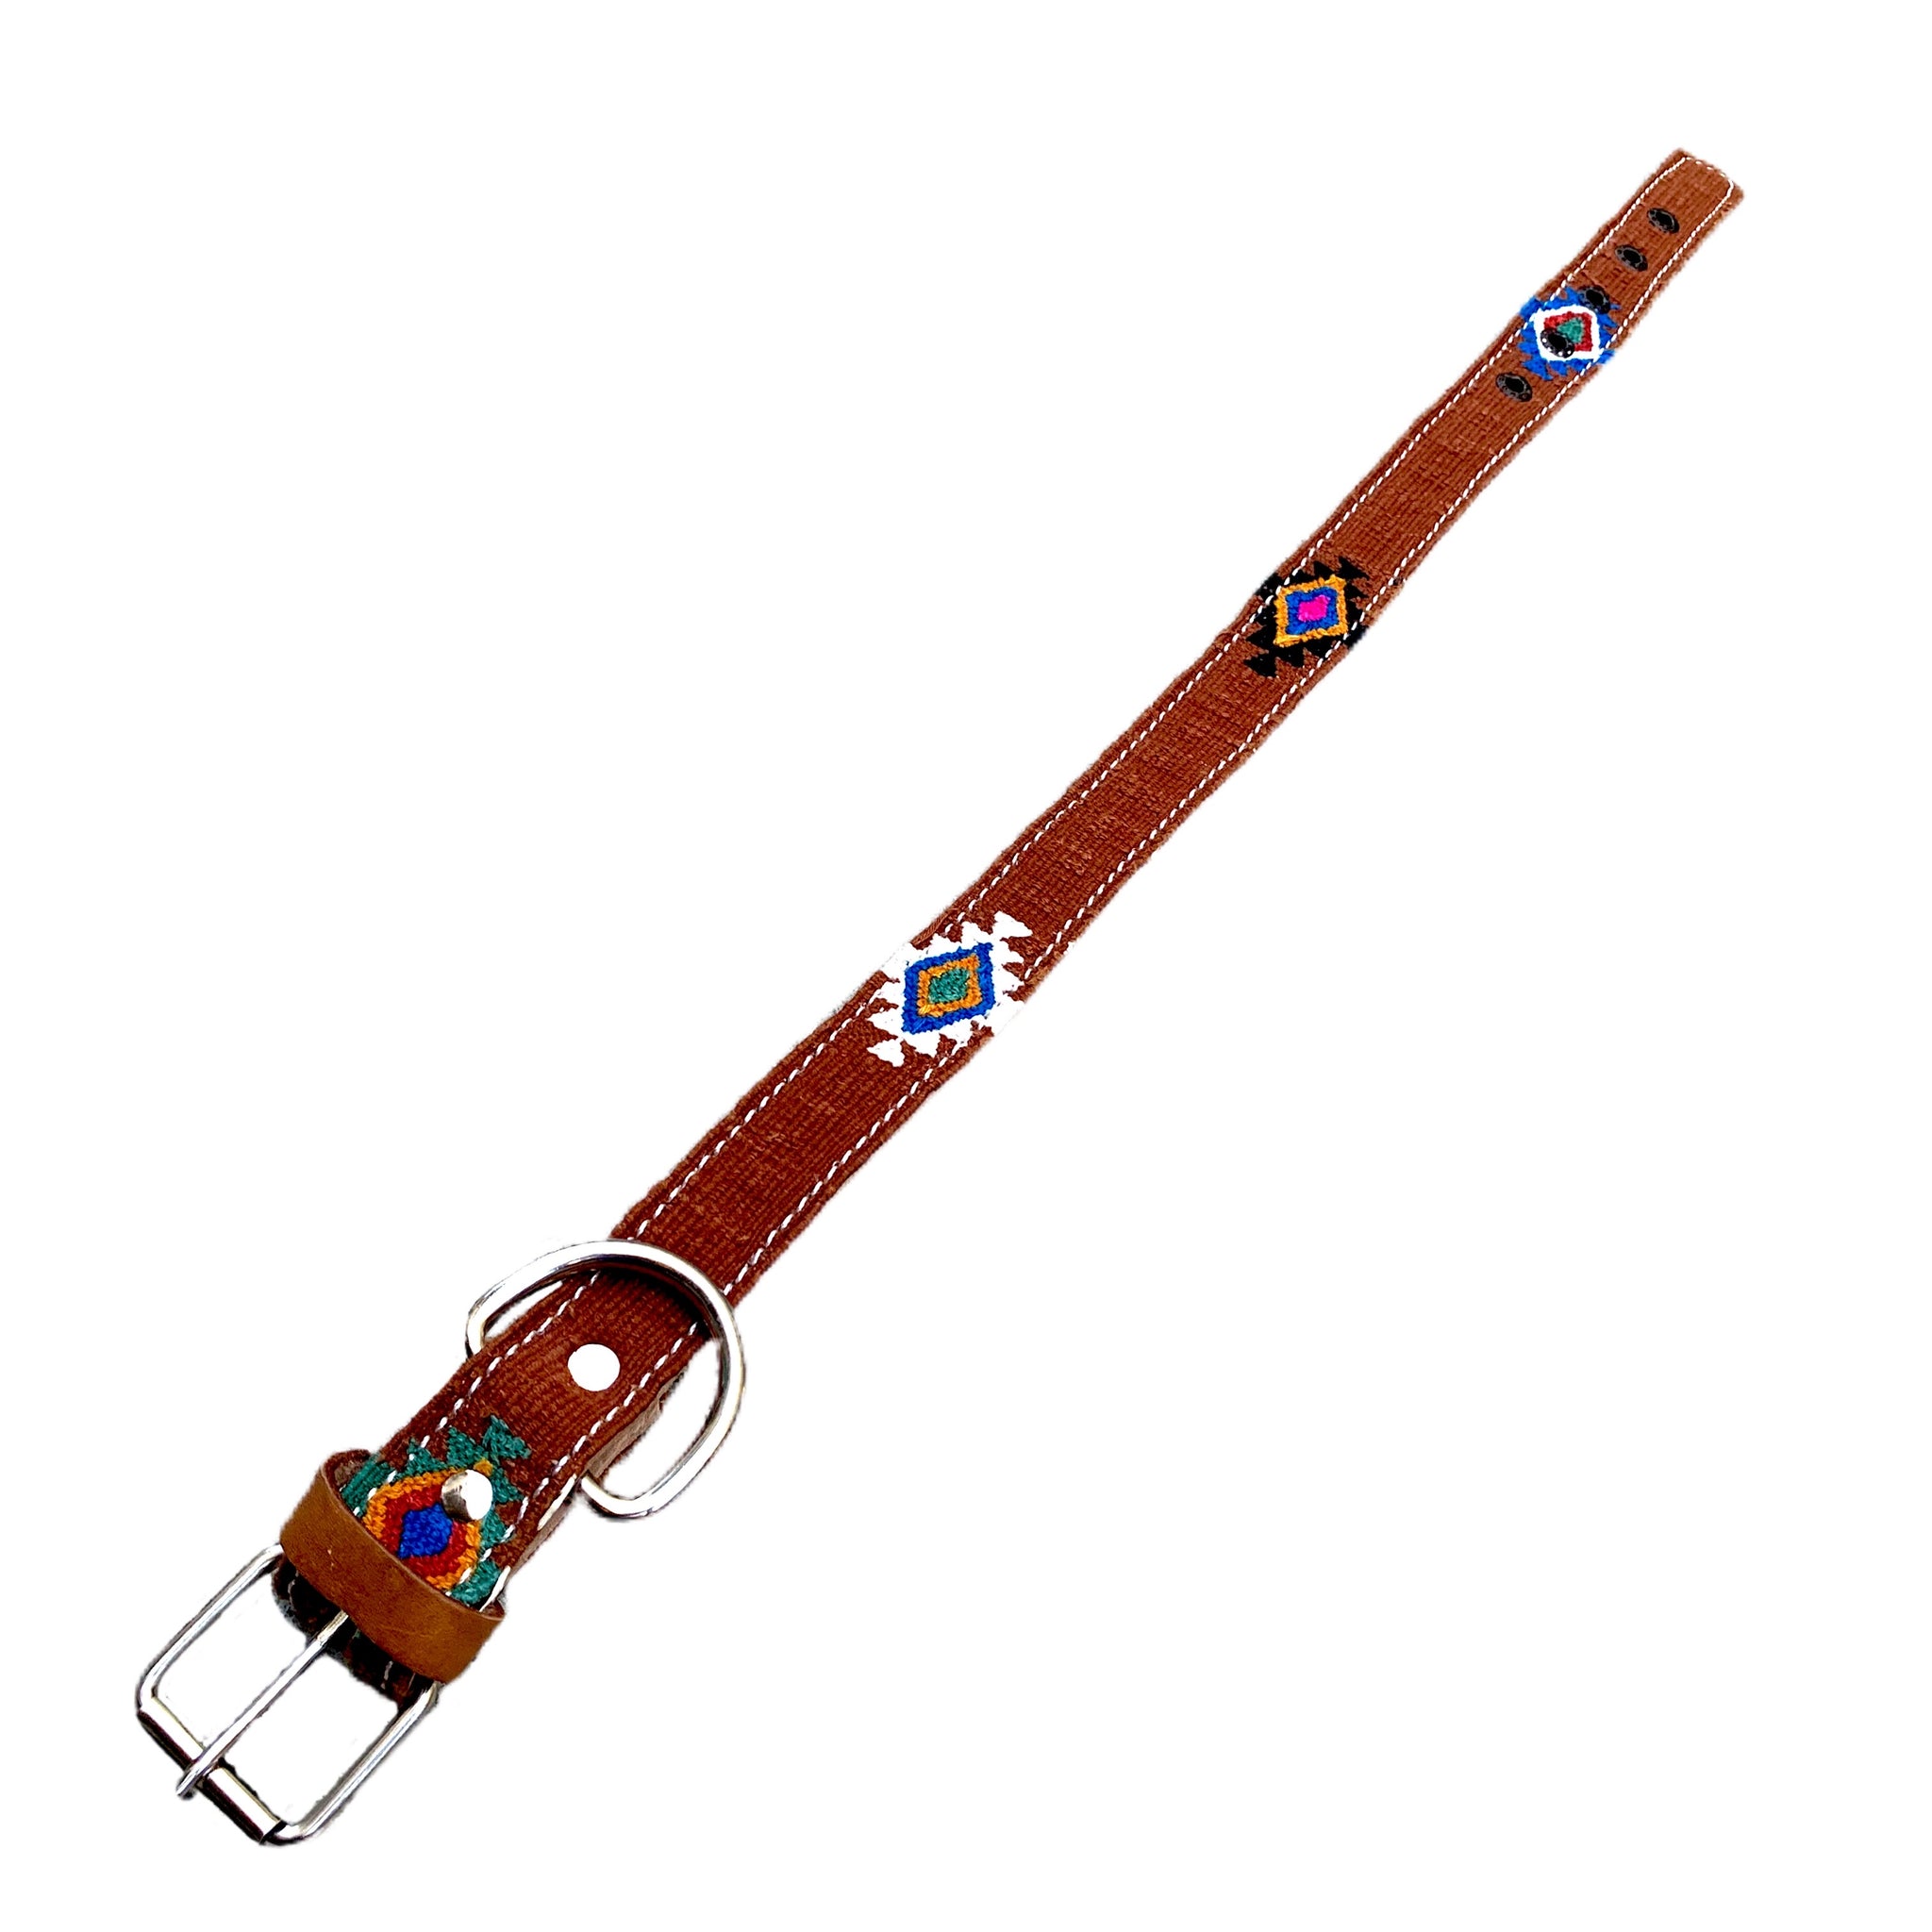 Colorful Hand-Woven Cotton & Leather Dog Collars From Guatemala - Large